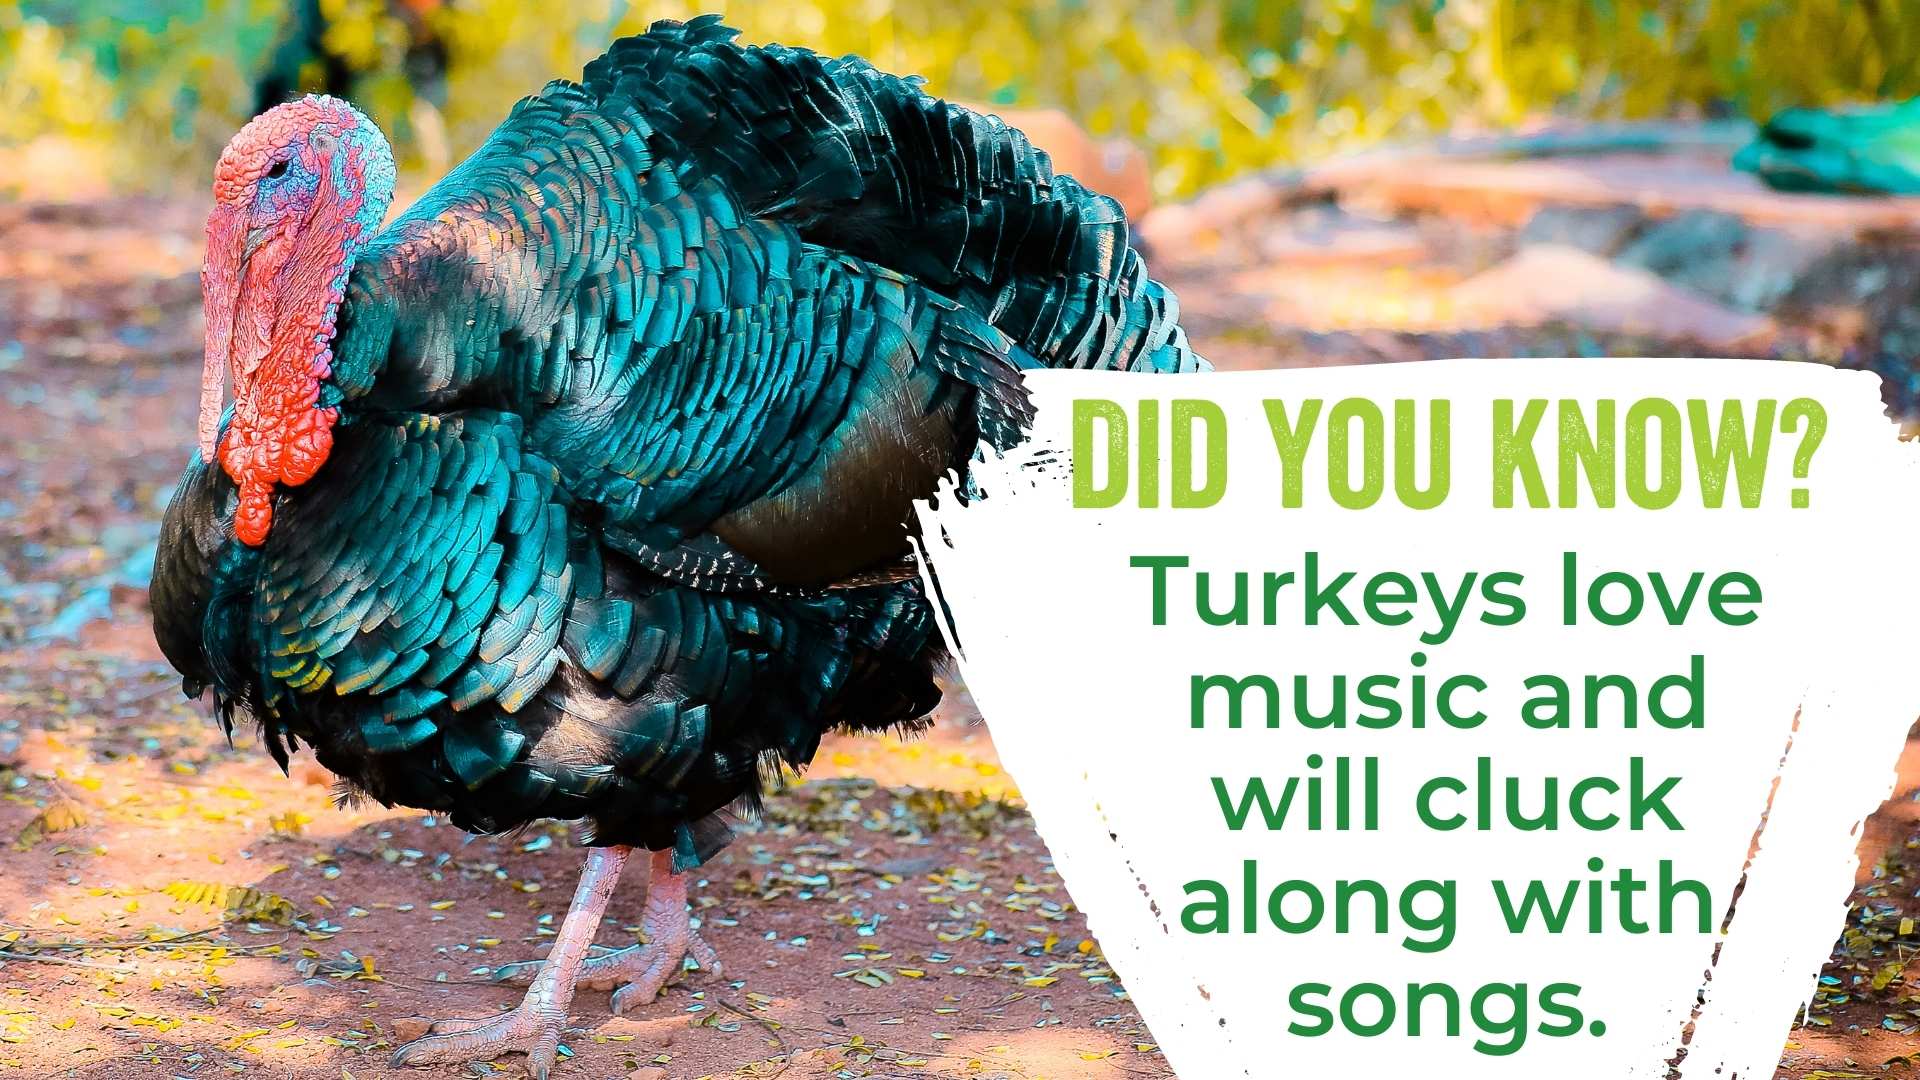 Turkeys love music and will cluck along with songs.